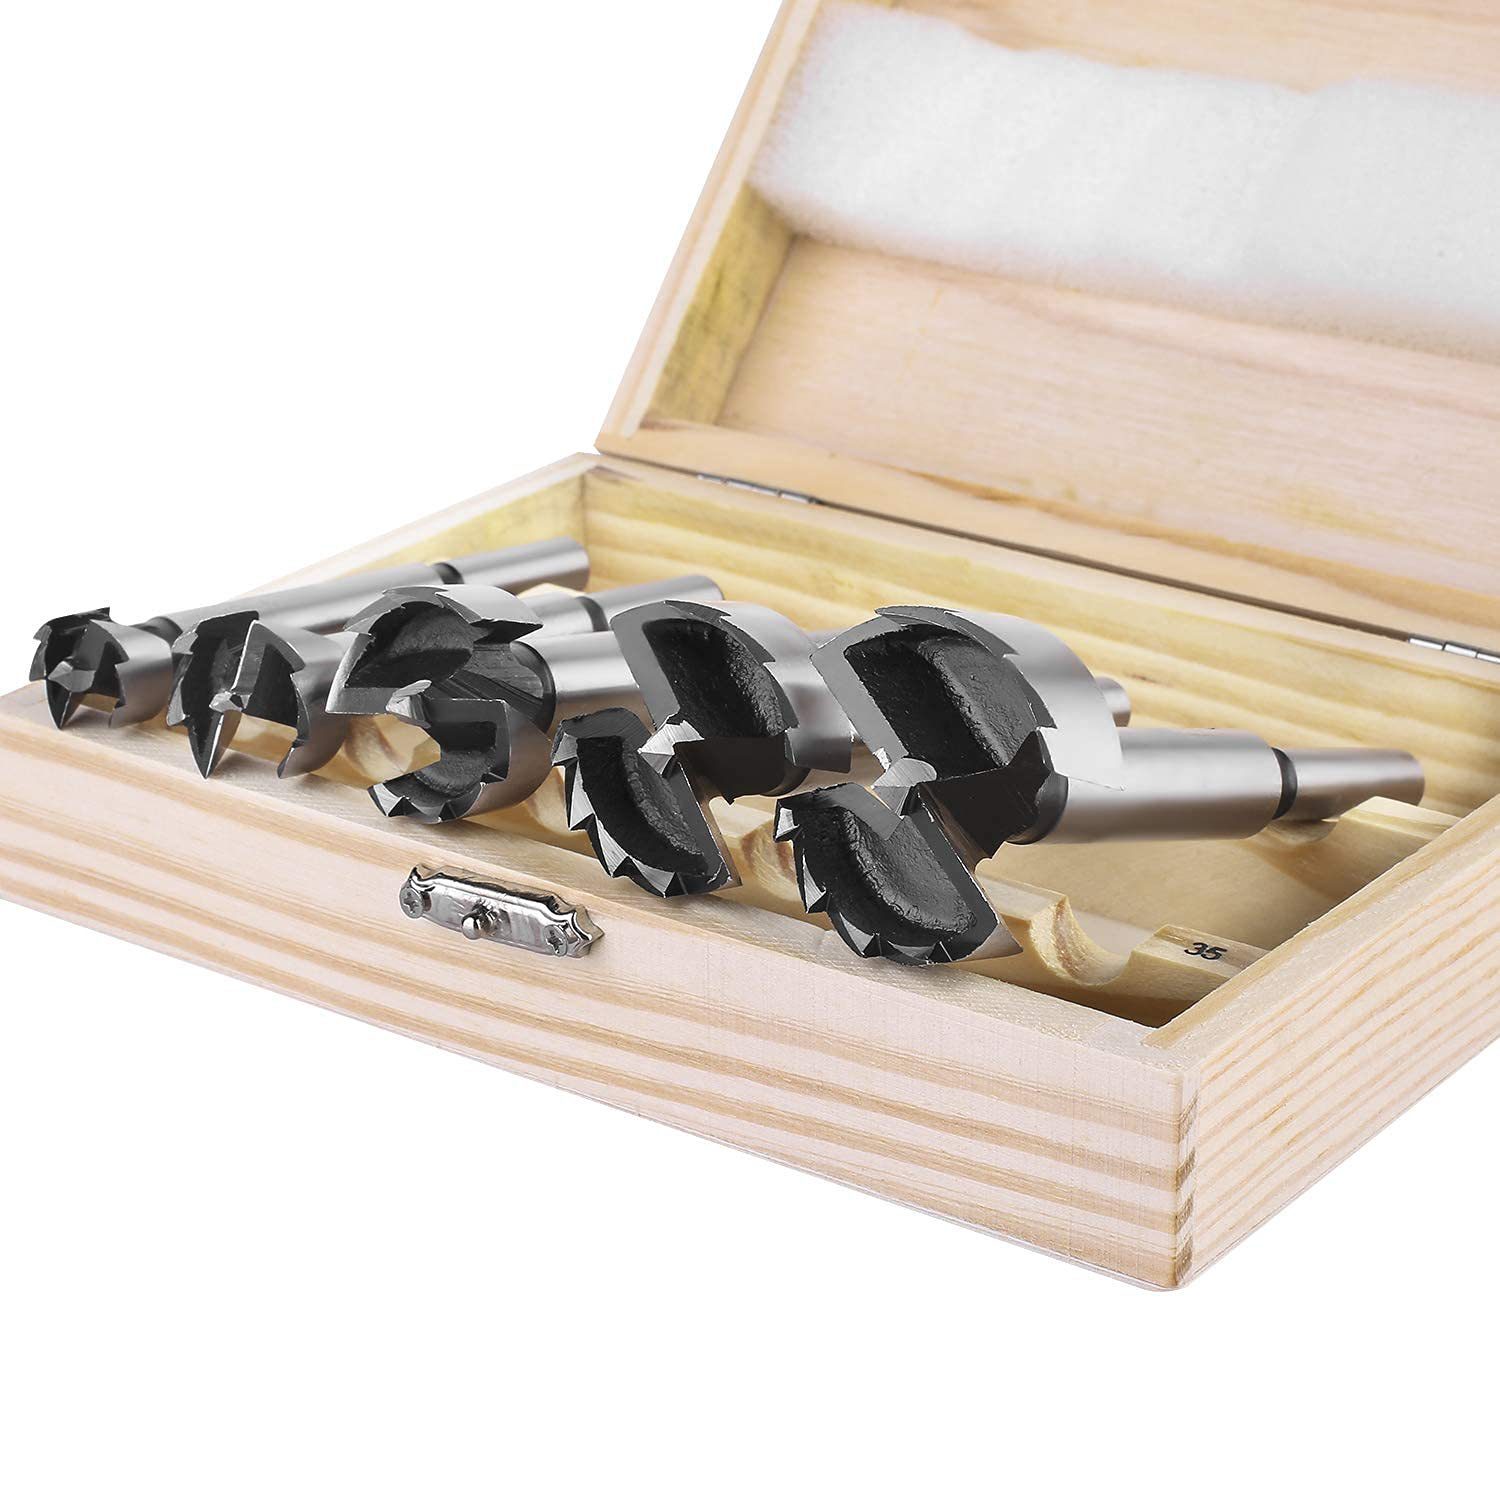 7PCS Sawtooth Type Wood Forstner Drill Bits Set in Wooden Box (SED-FDG-S7)